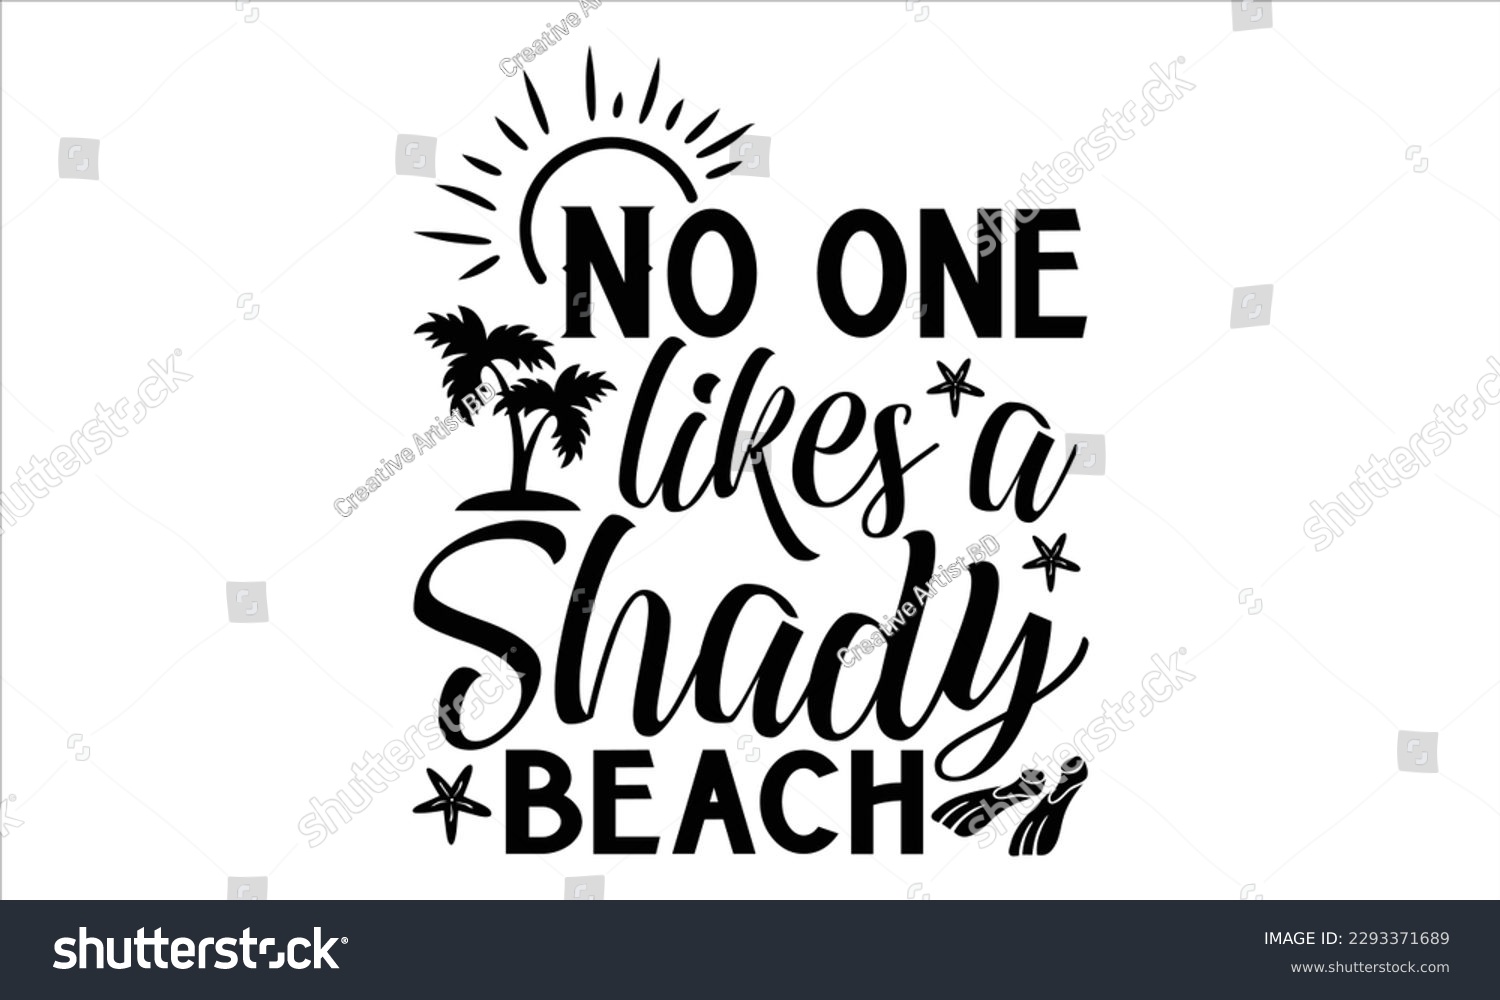 SVG of No one likes a shady beach - Summer T Shirt Design, Hand drawn lettering and calligraphy, Cutting Cricut and Silhouette, svg file, poster, banner, flyer and mug. svg